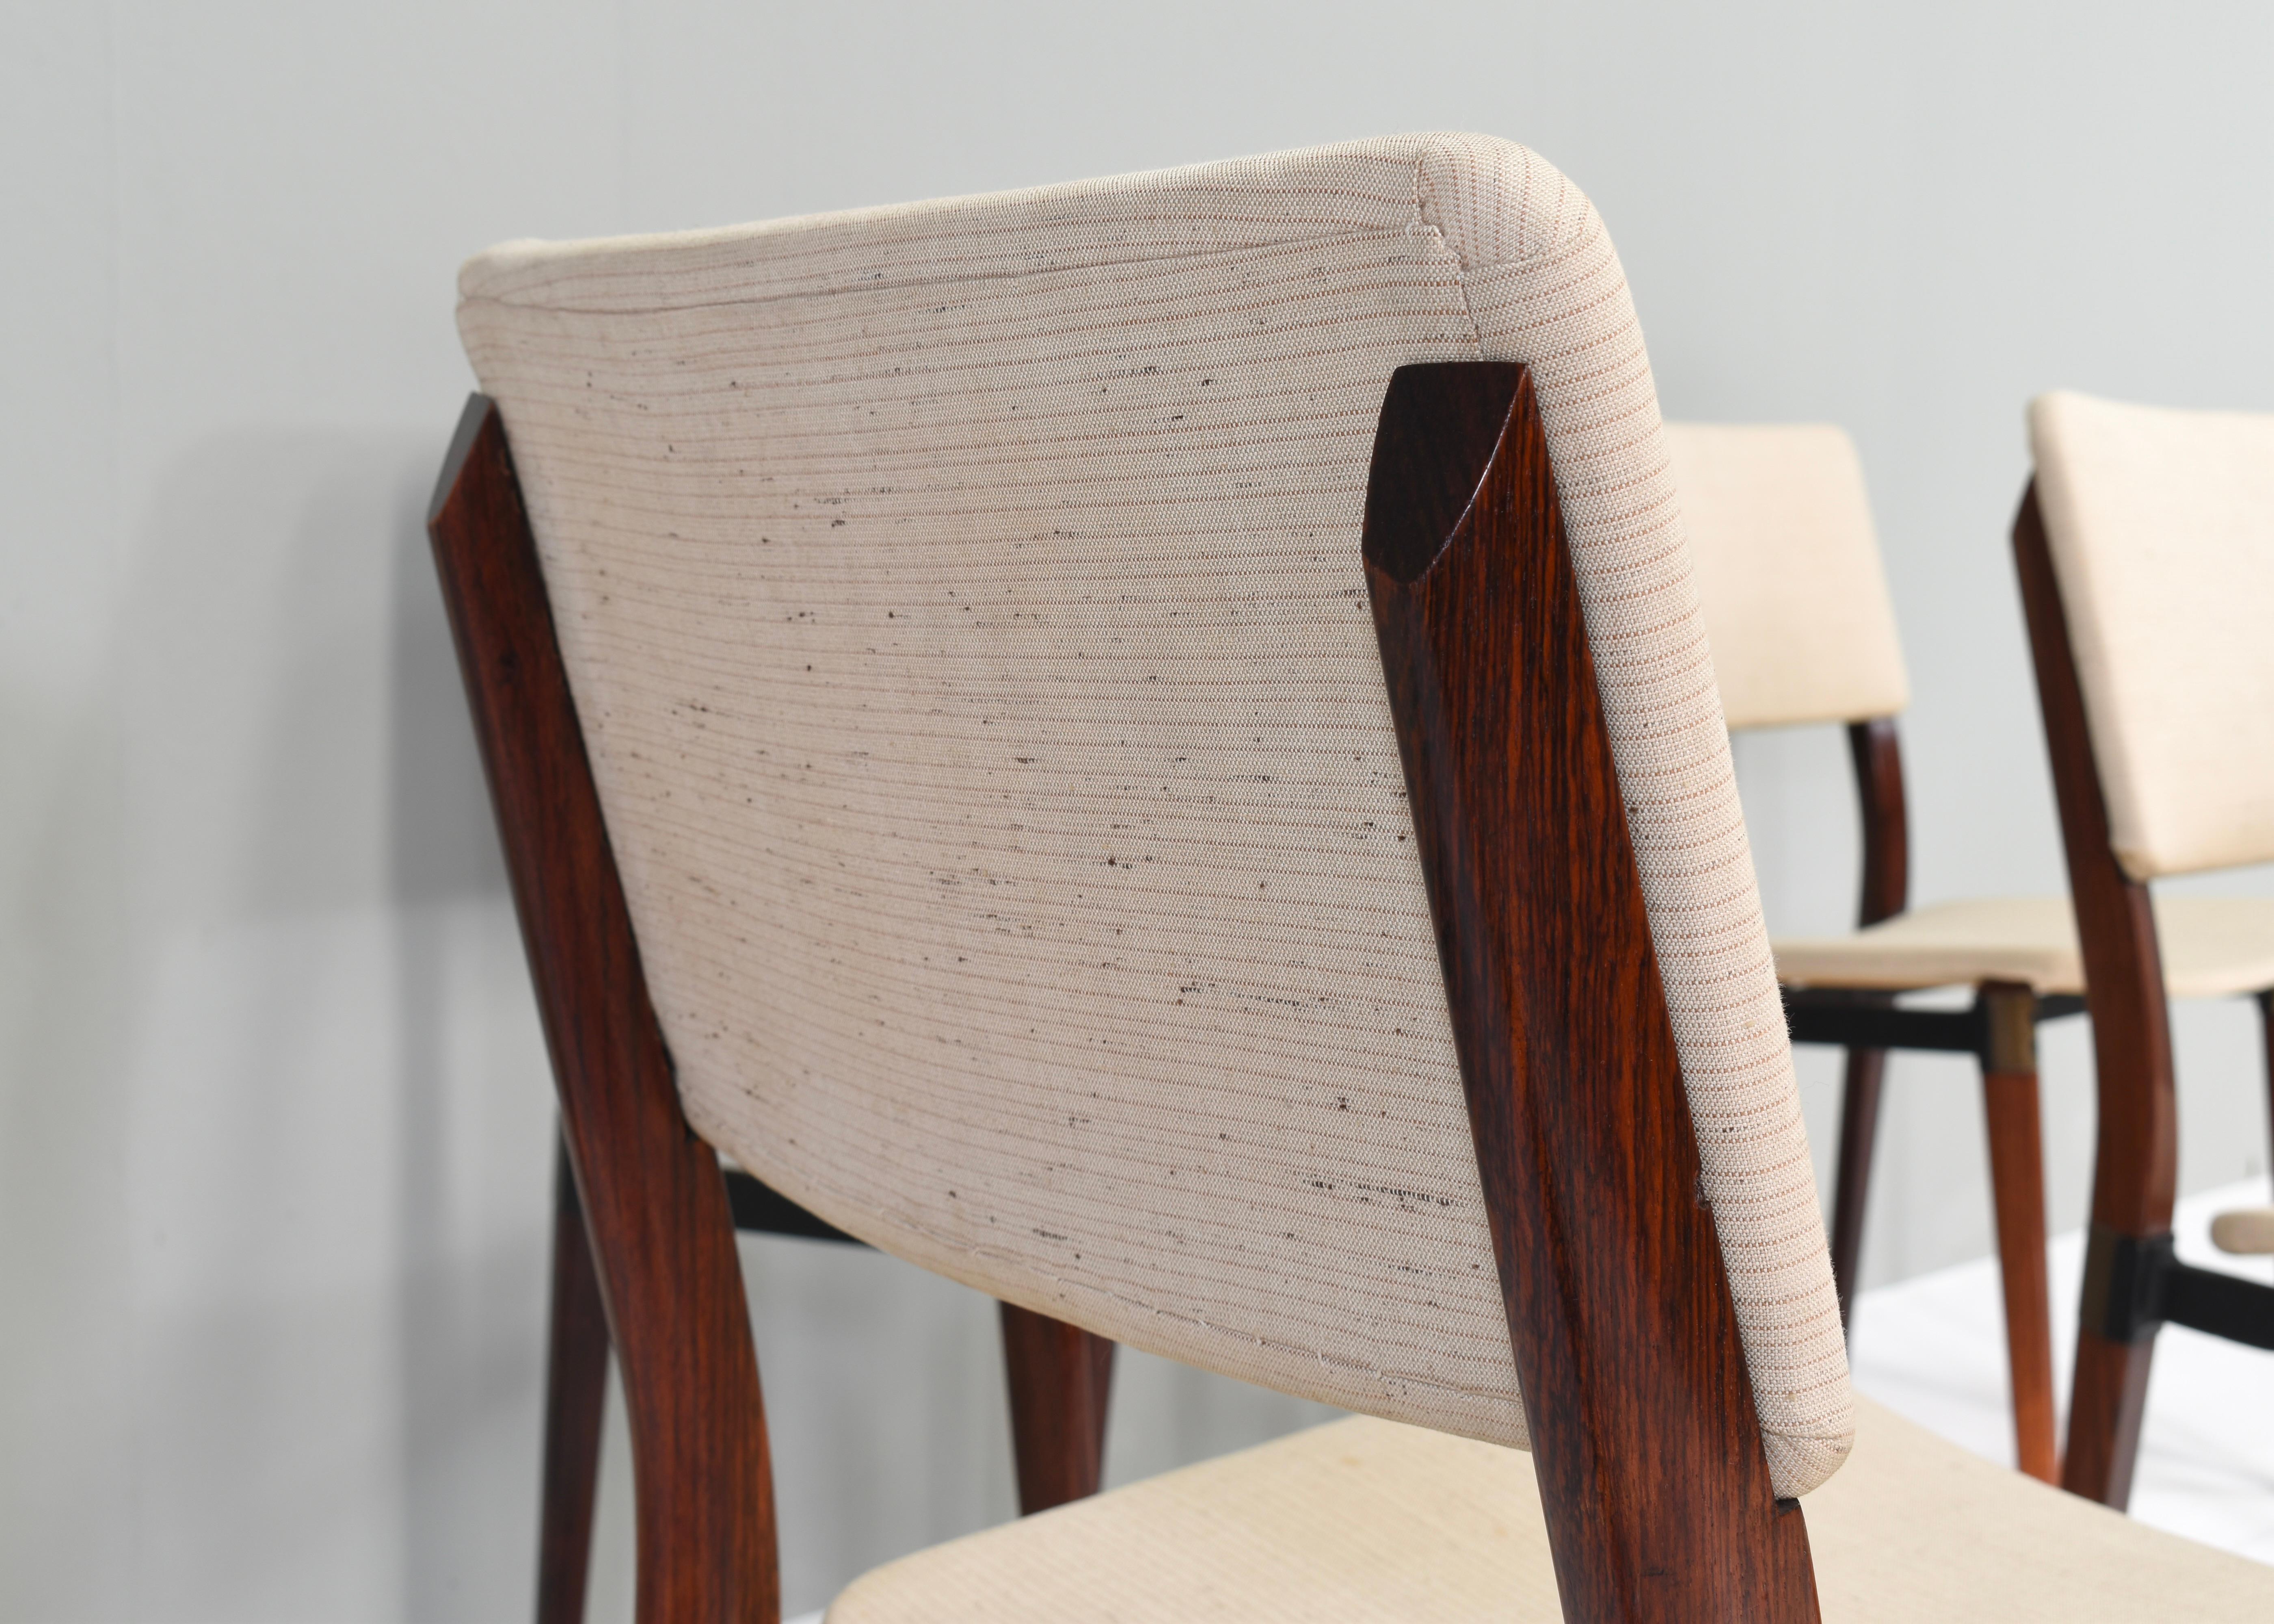 Eugenio Gerli S82 Dining Chairs Set of Six by Tecno, Italy, circa 1960 For Sale 5